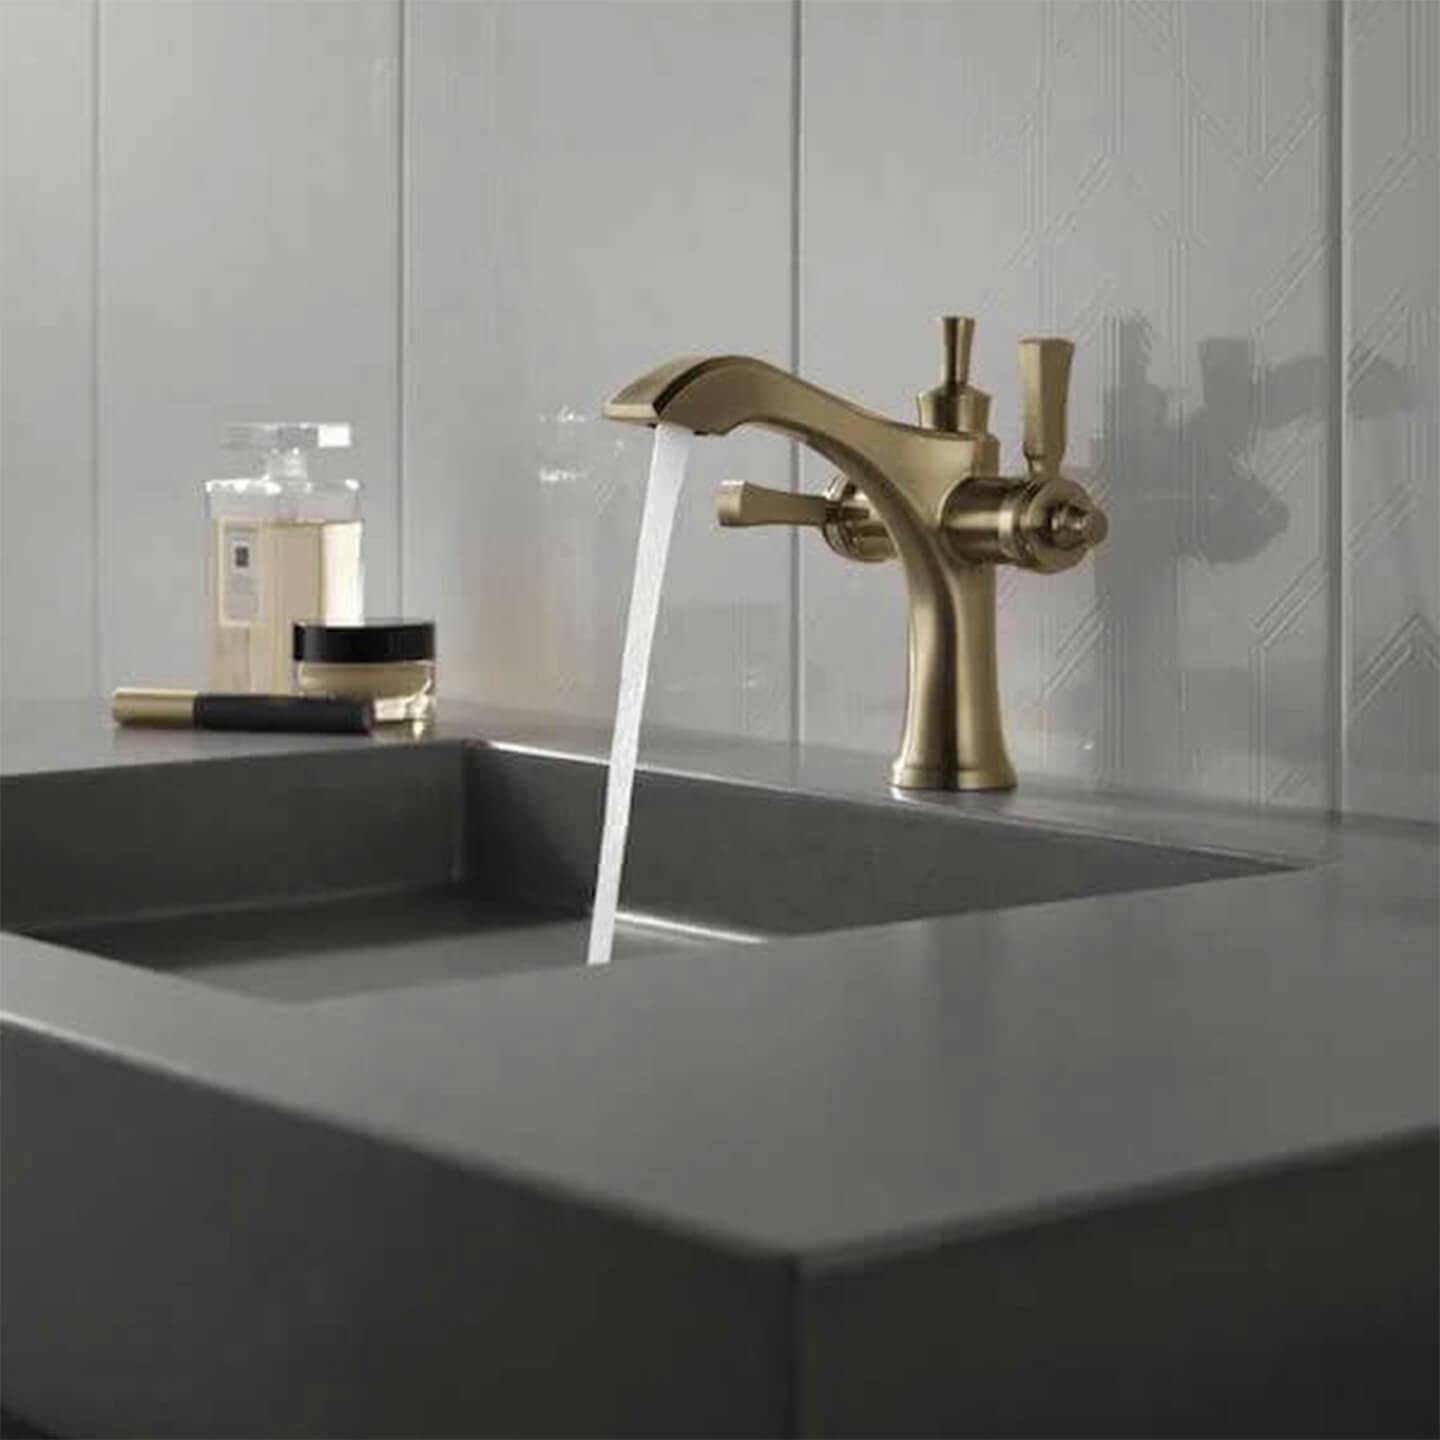 Champagne Bronze faucet with water running into a dark stone sink